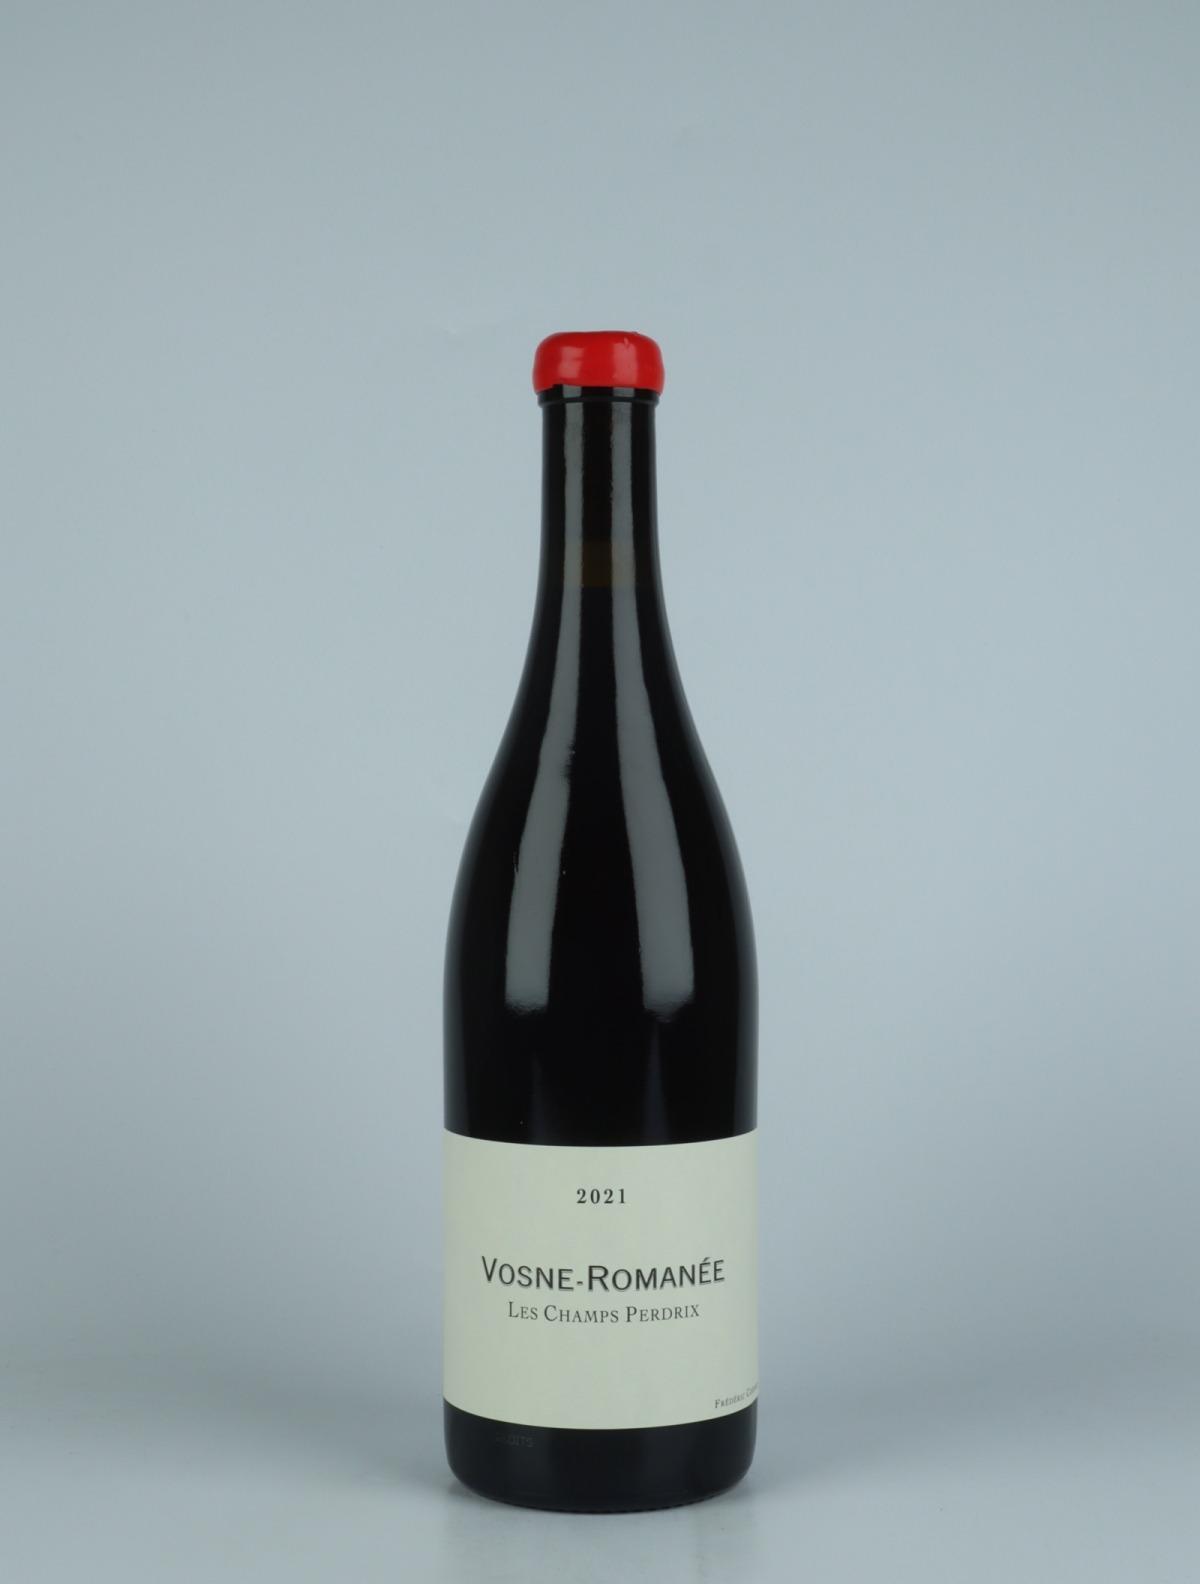 A bottle 2021 Vosne Romanée - Les Champs Perdrix Red wine from Frédéric Cossard, Burgundy in France